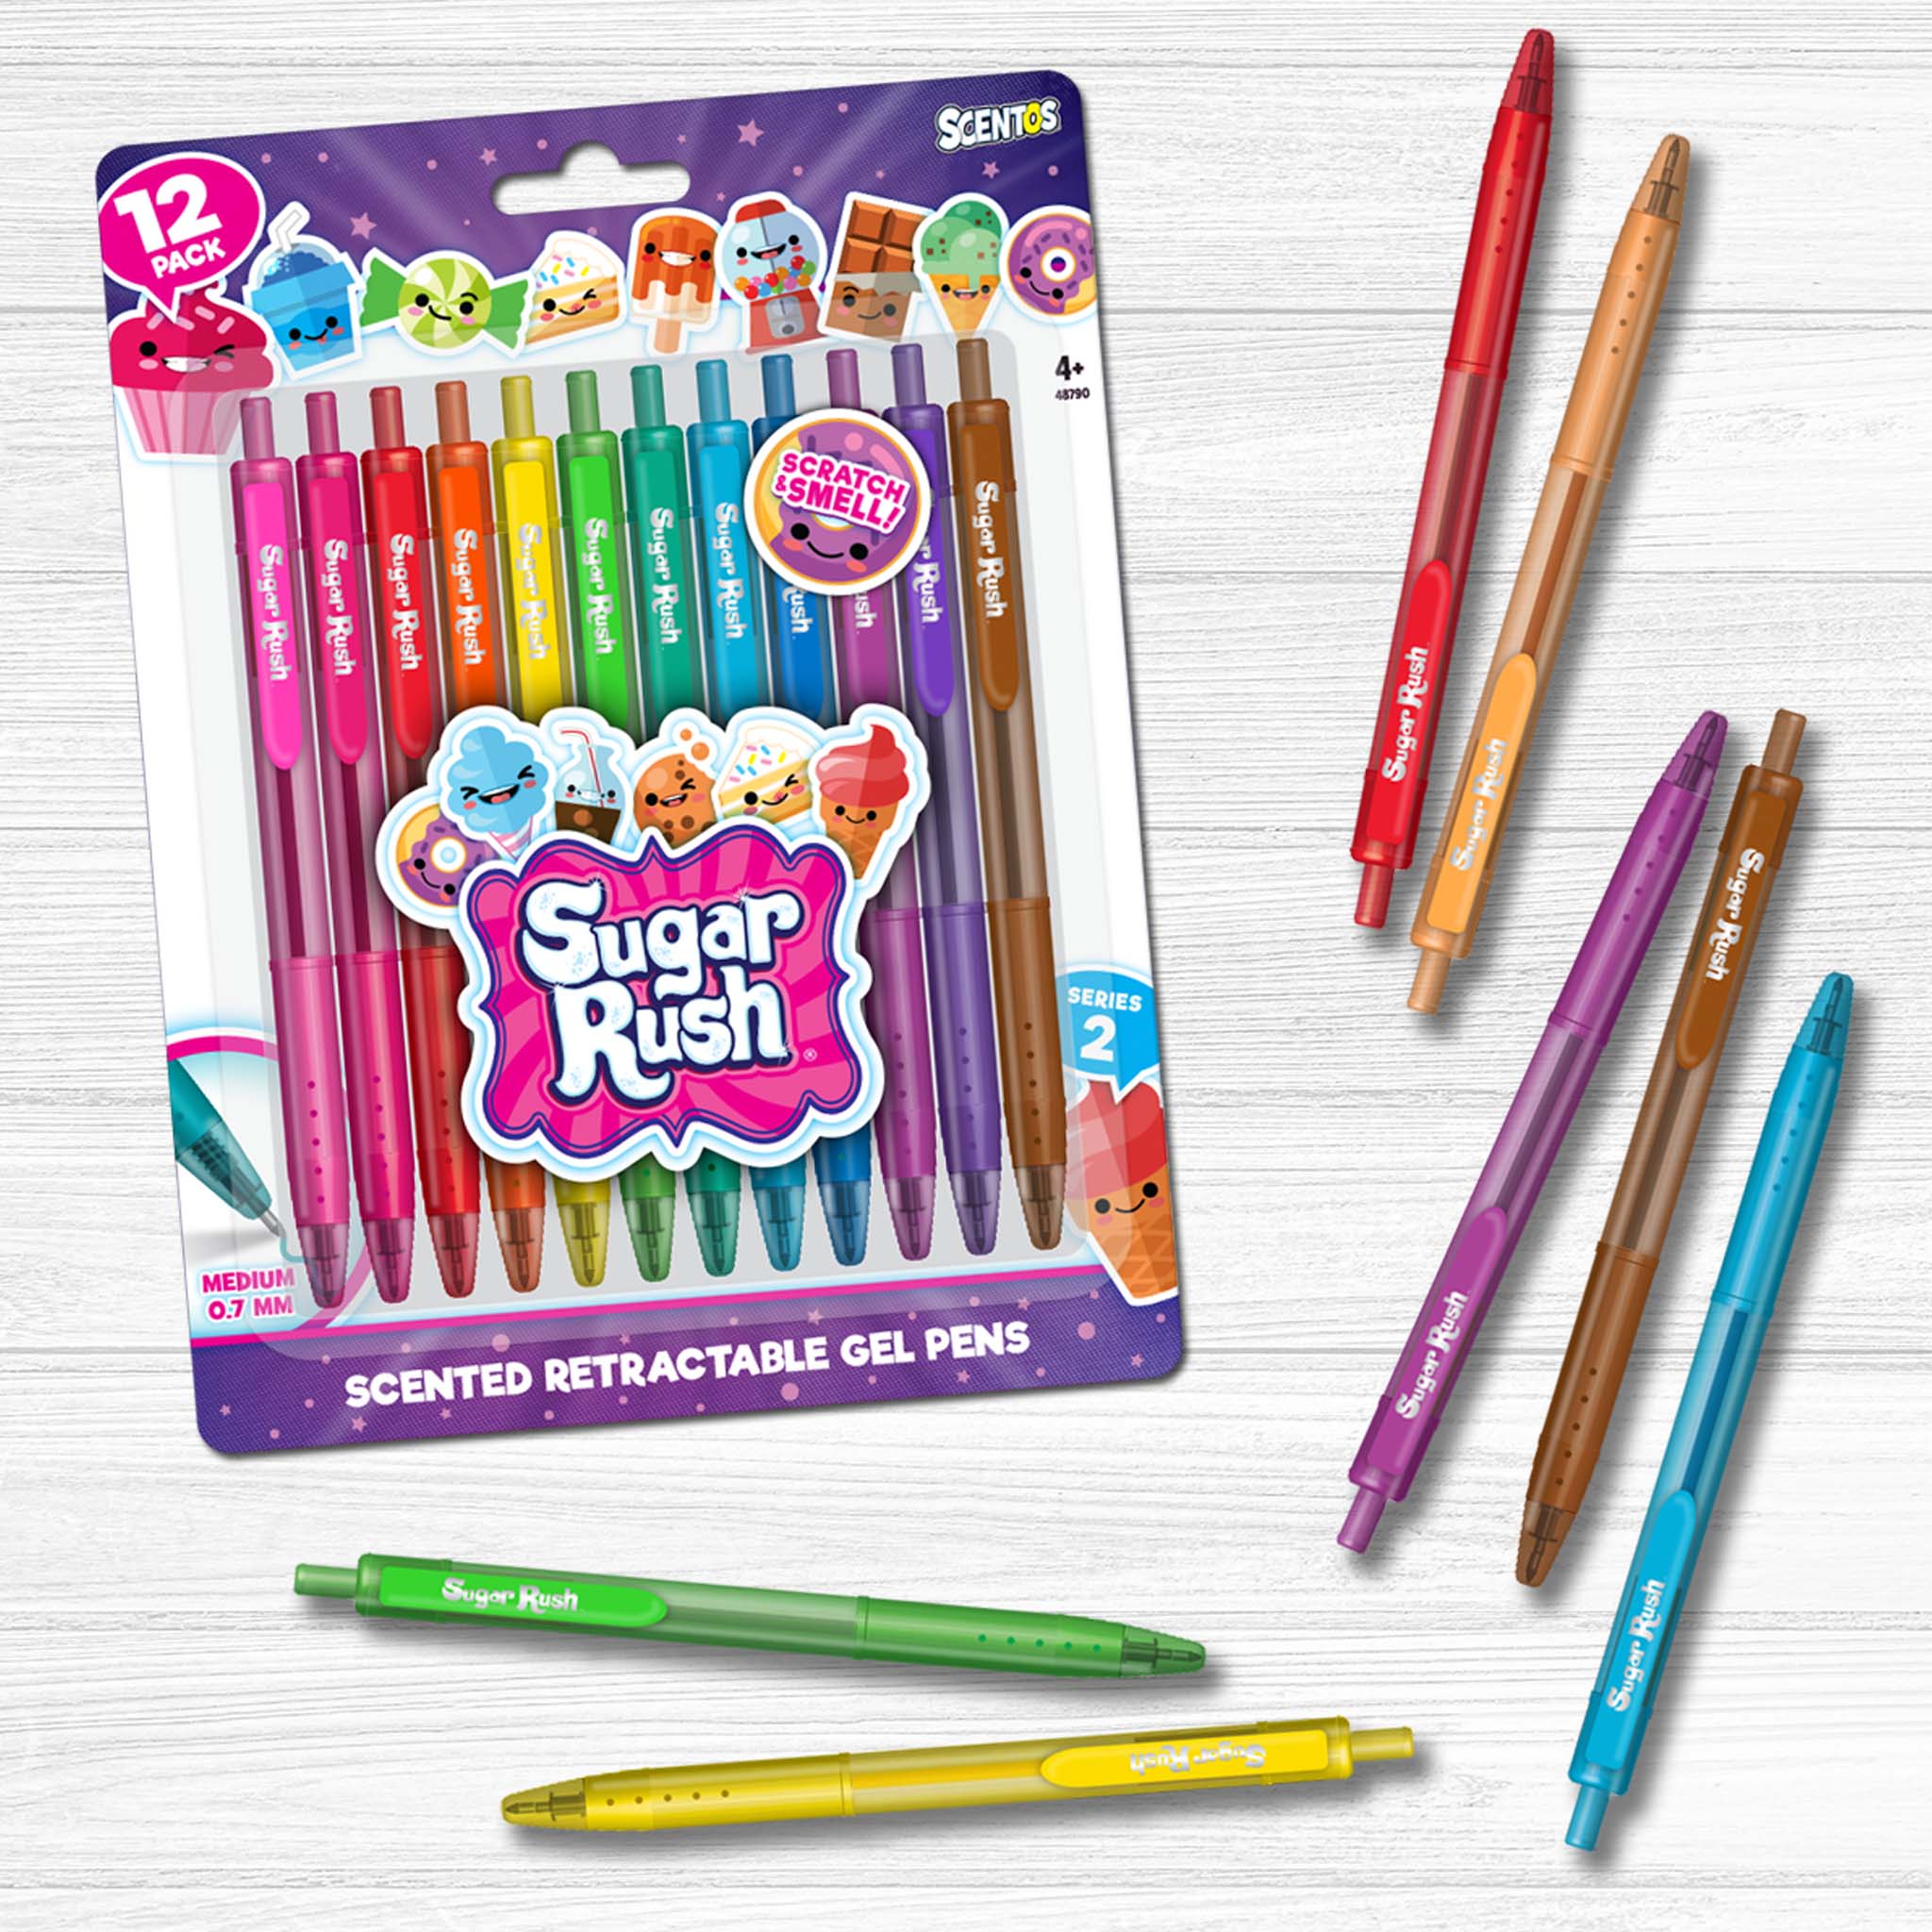  Scentos Sugar Rush Colored Gel Pens for Kids - Candy Scented  Pens - Medium Point Gel Pens for Coloring - For Ages 4 and Up - 12 Count  (Pom) : Office Products